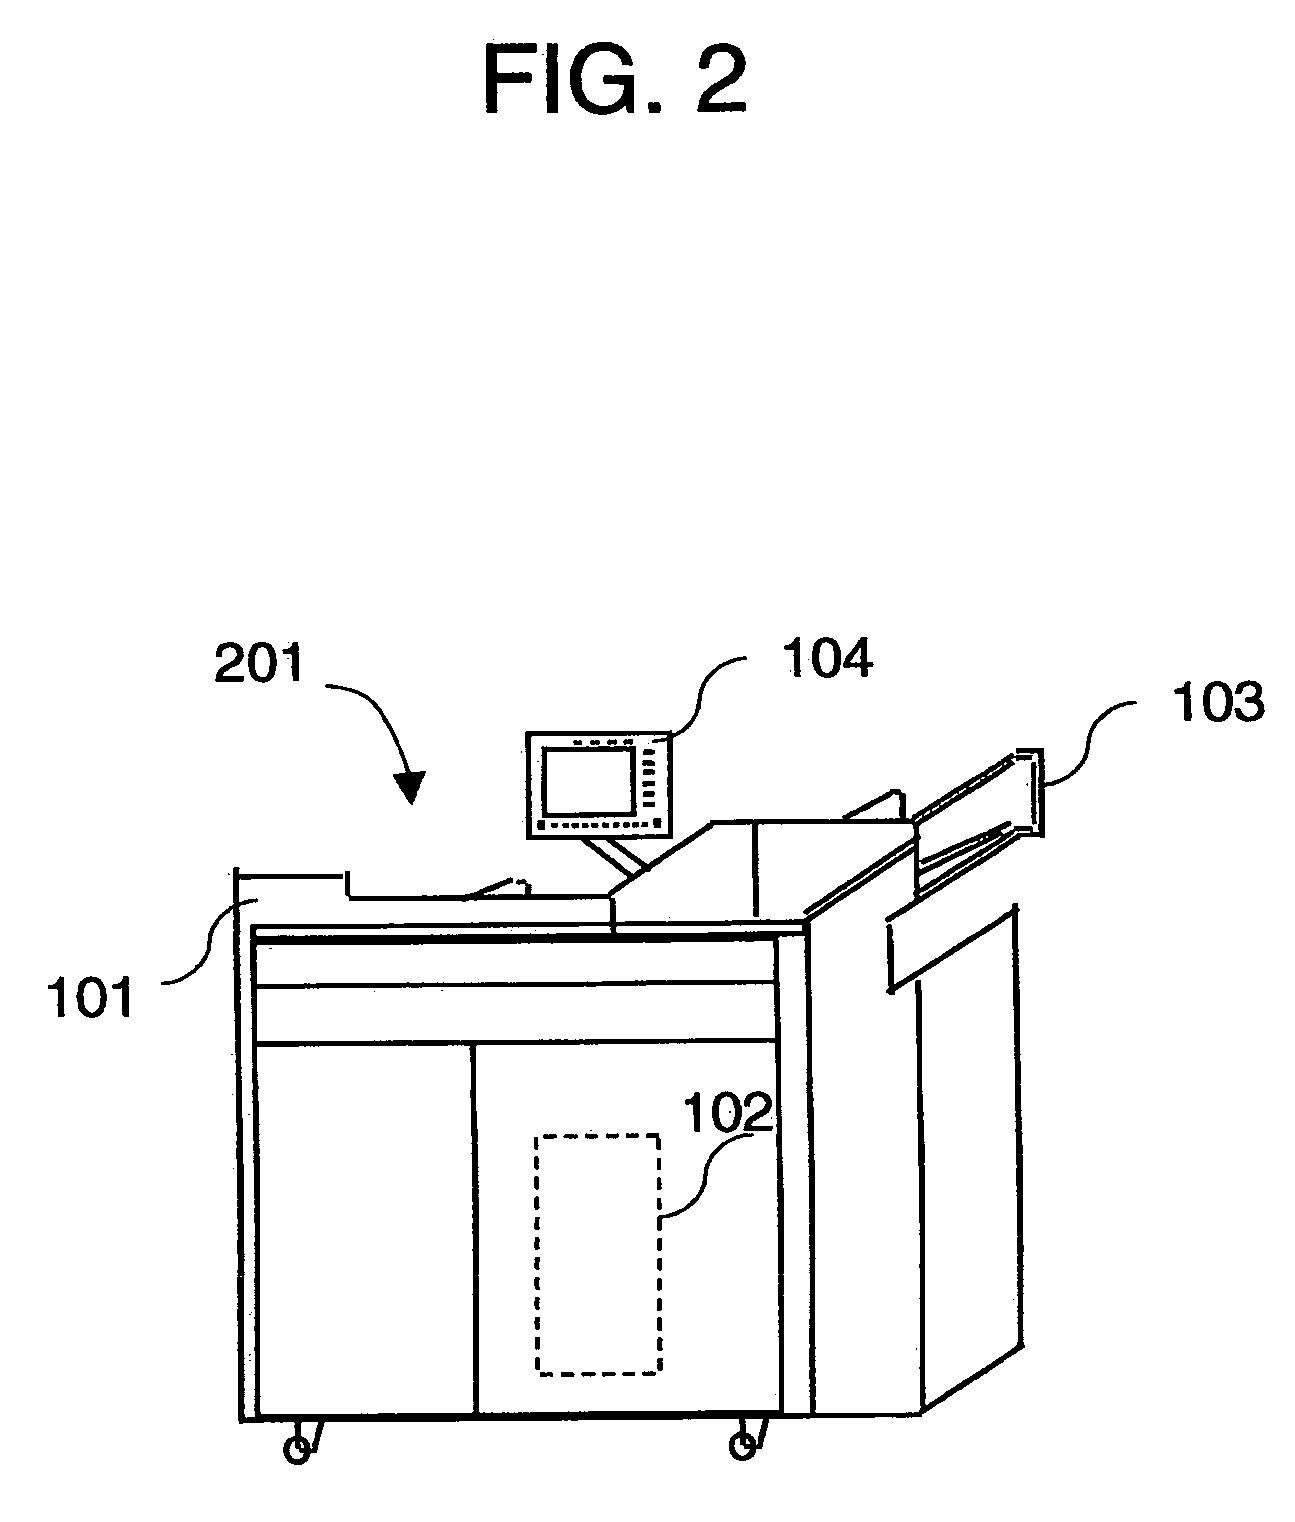 Apparatus and method for automatically analysing a filled in questionnaire